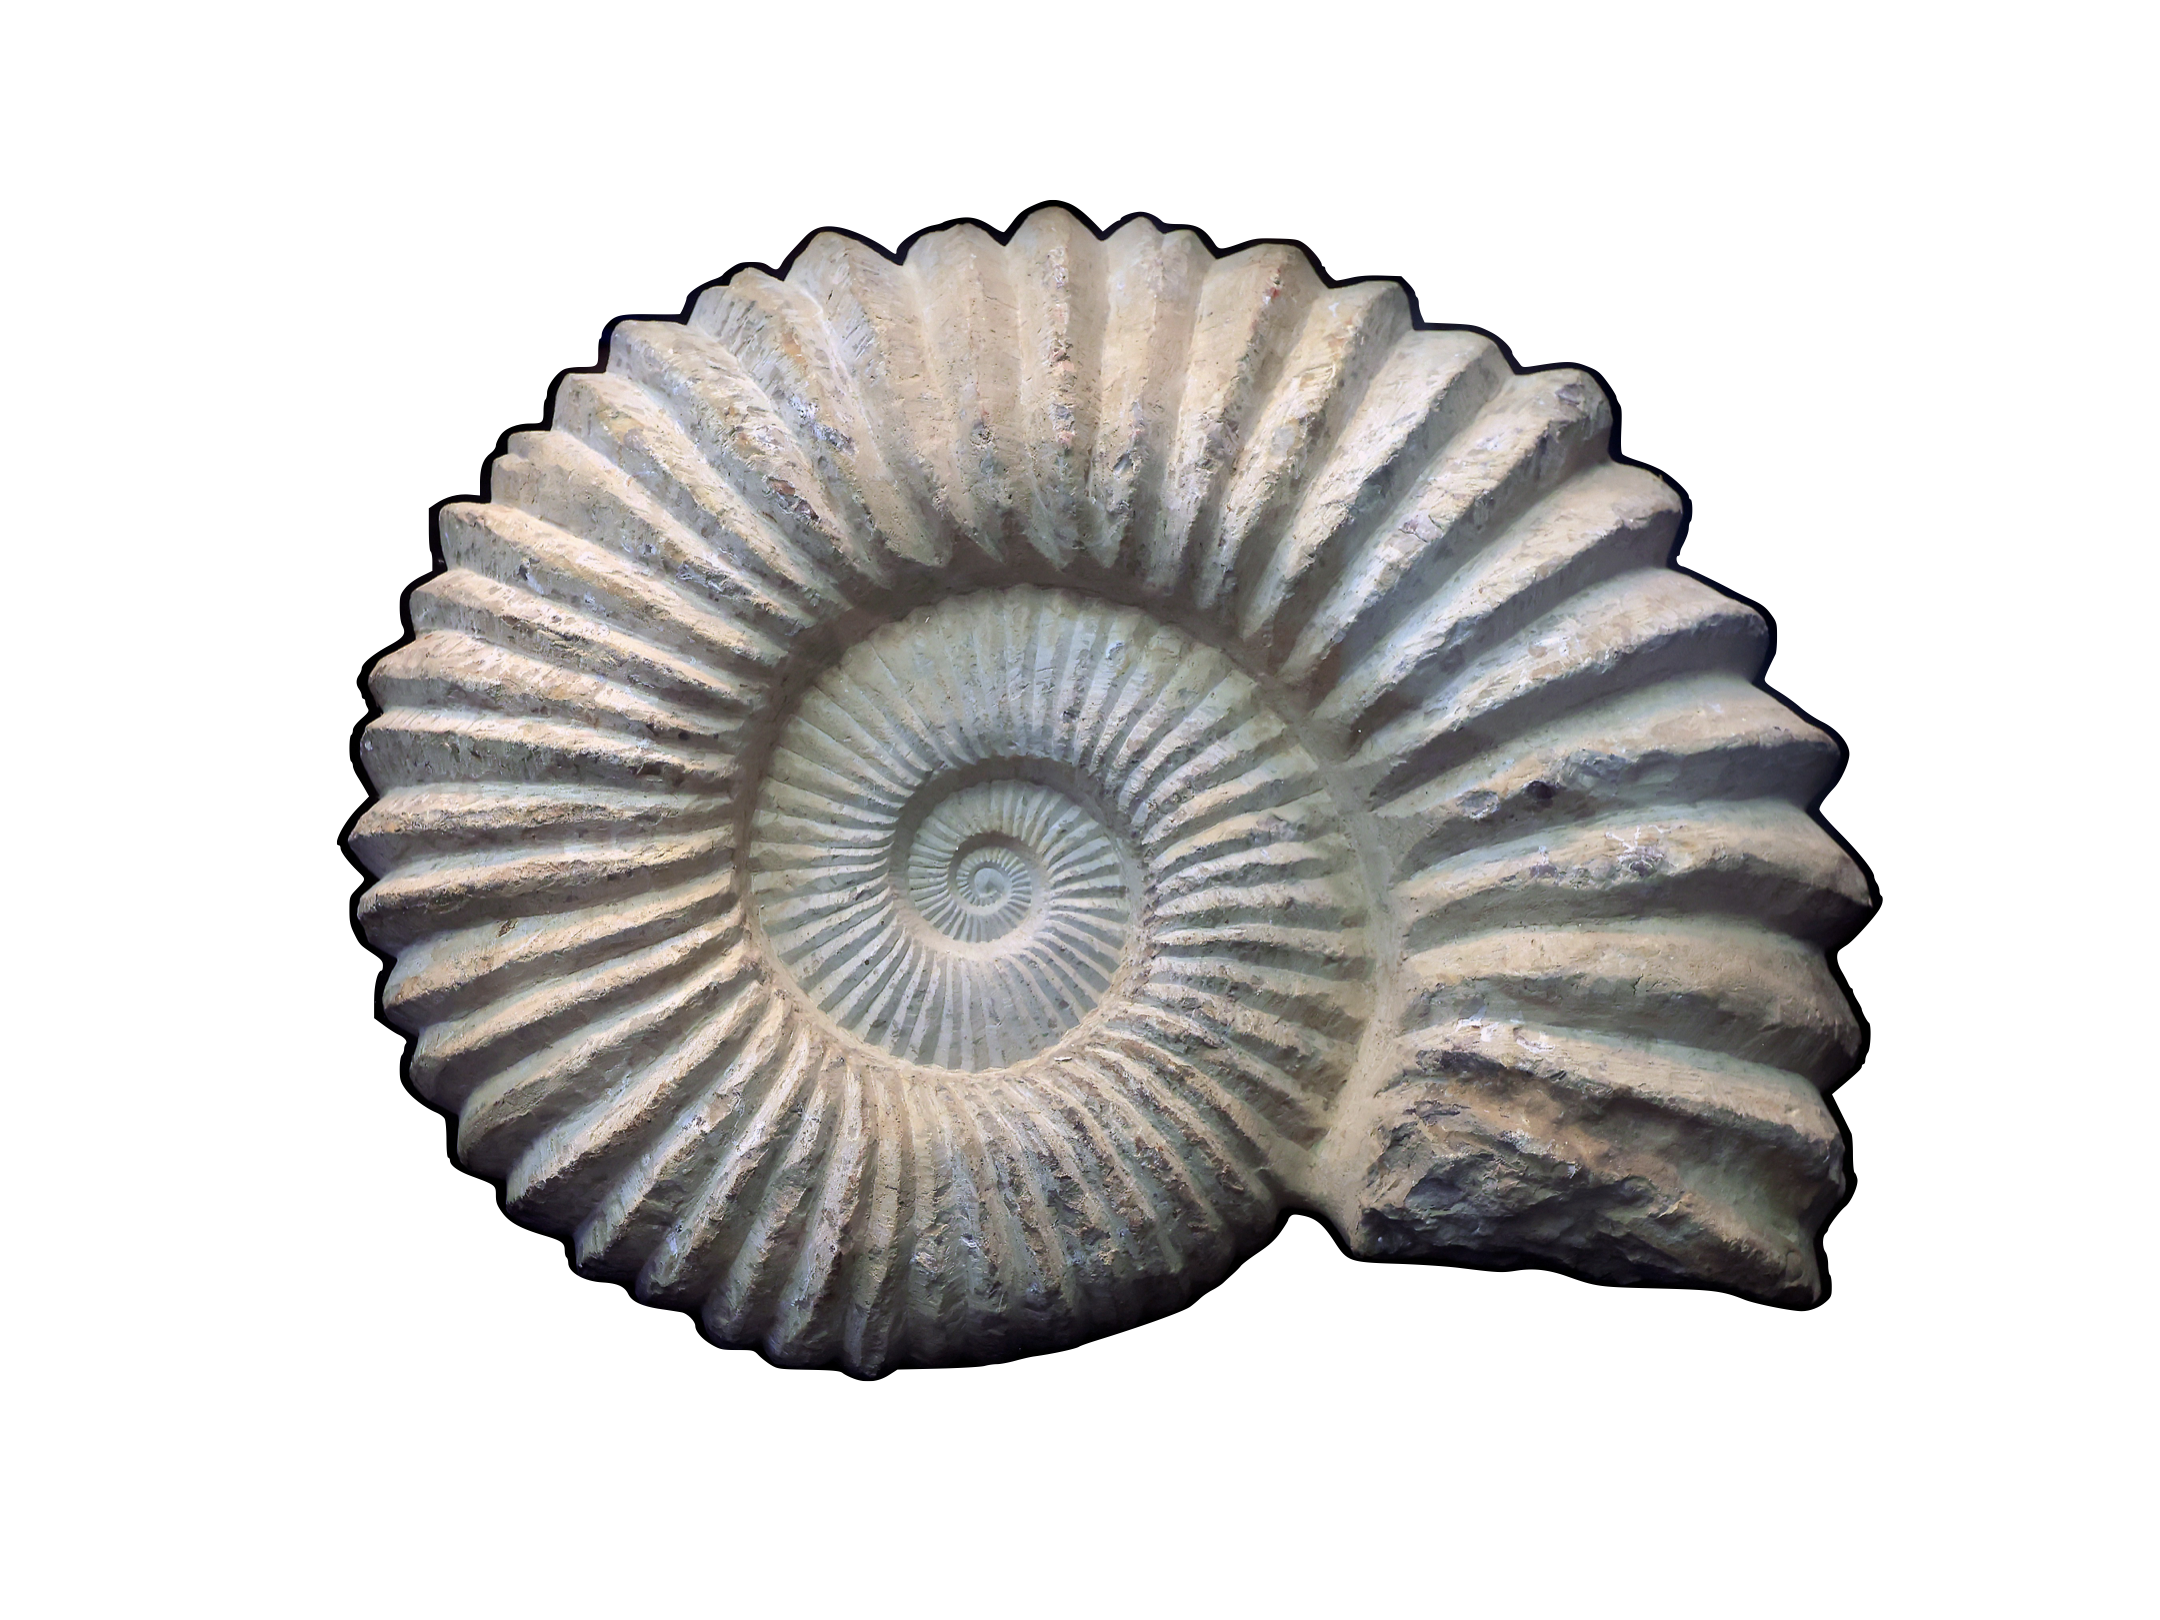 Image depicting a shell in the form of the Golden Ratio spiral. 